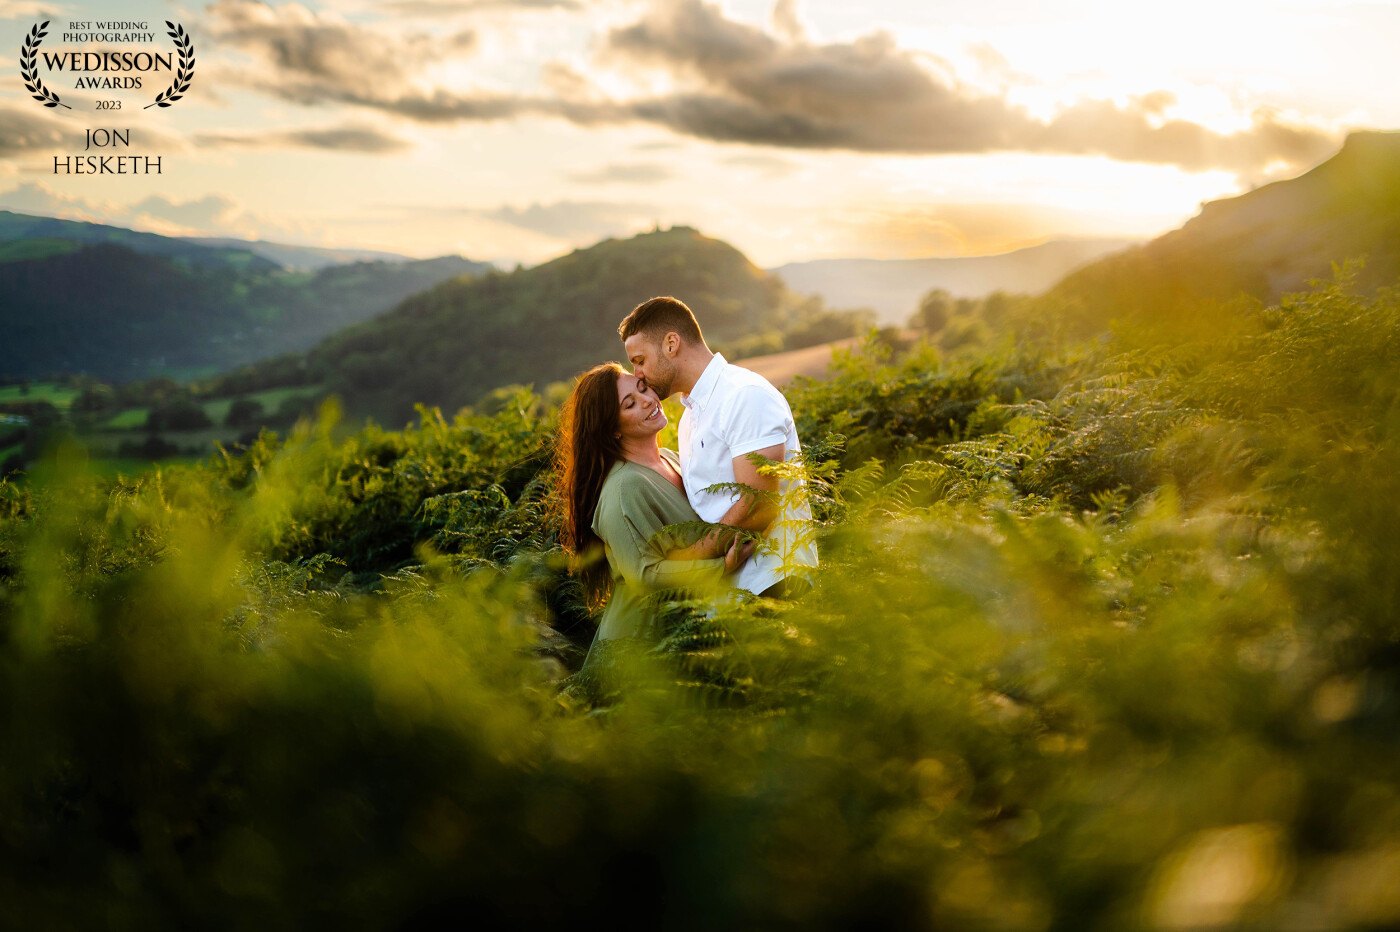 An amazing evening on the panorama above Llangollen, North Wales. So many beautiful moments in this set, and so happy for the couple this picked up and award as they were so nervous at the beginning of the shoot.